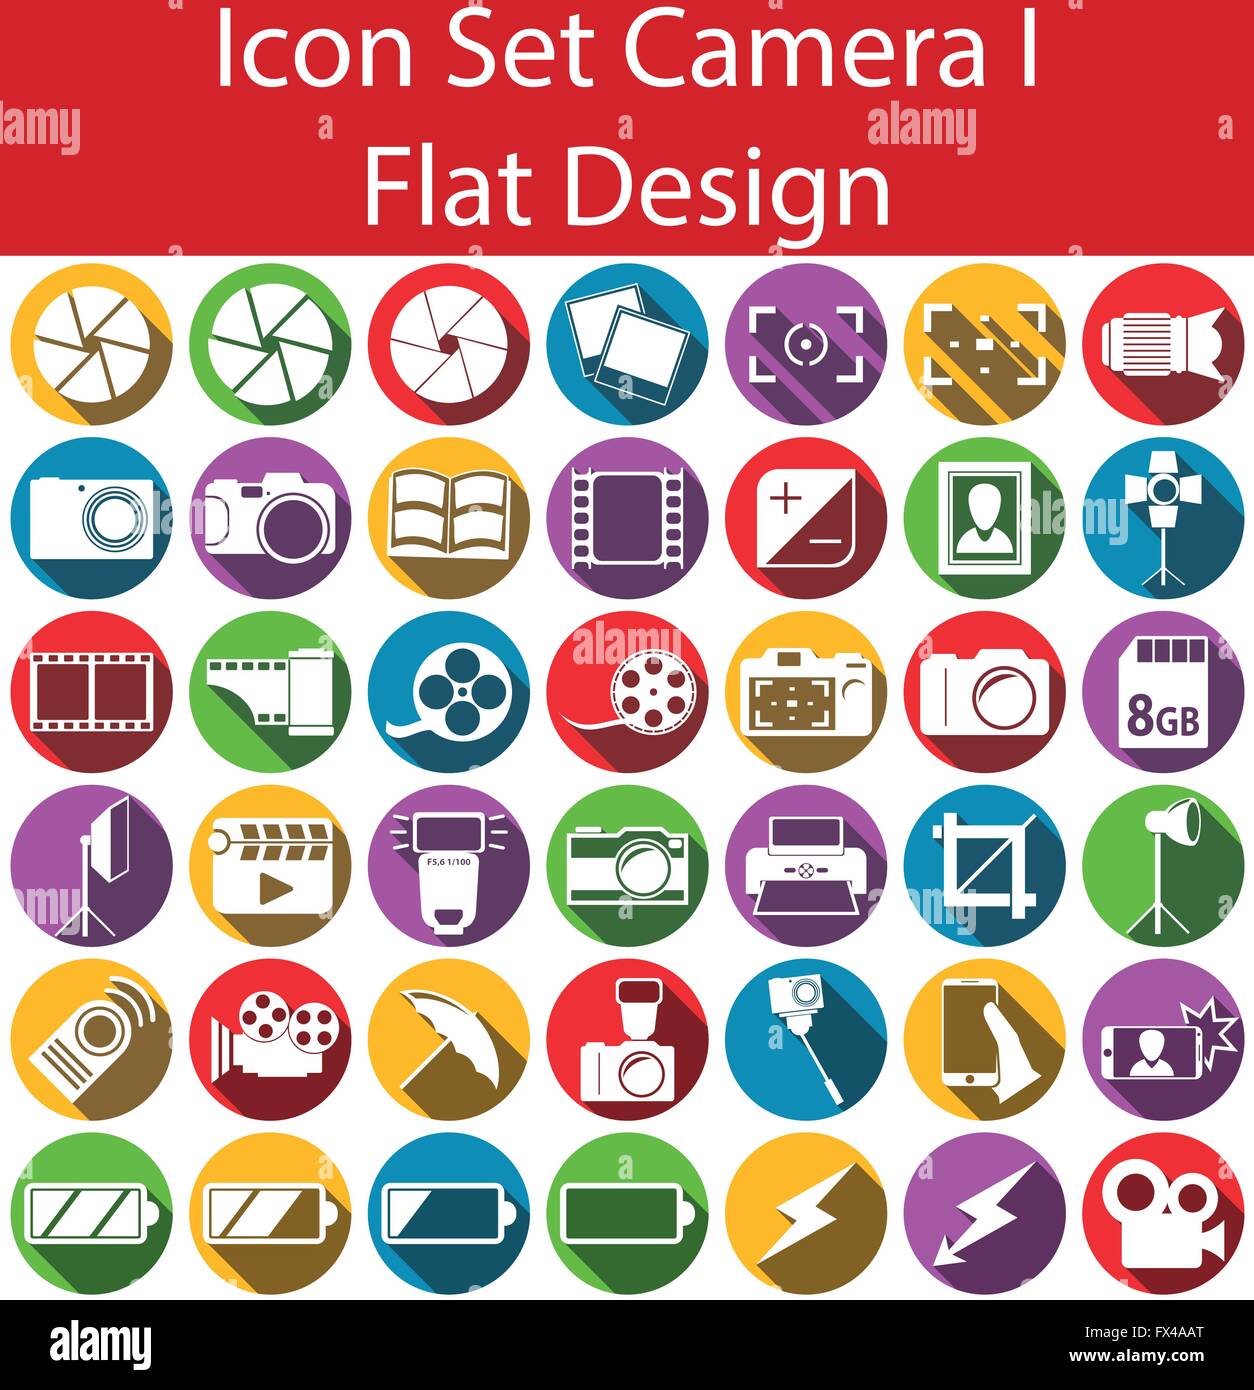 Flat Design Icon Set Camera I with 42 icons for the creative use in web an graphic design Stock Vector